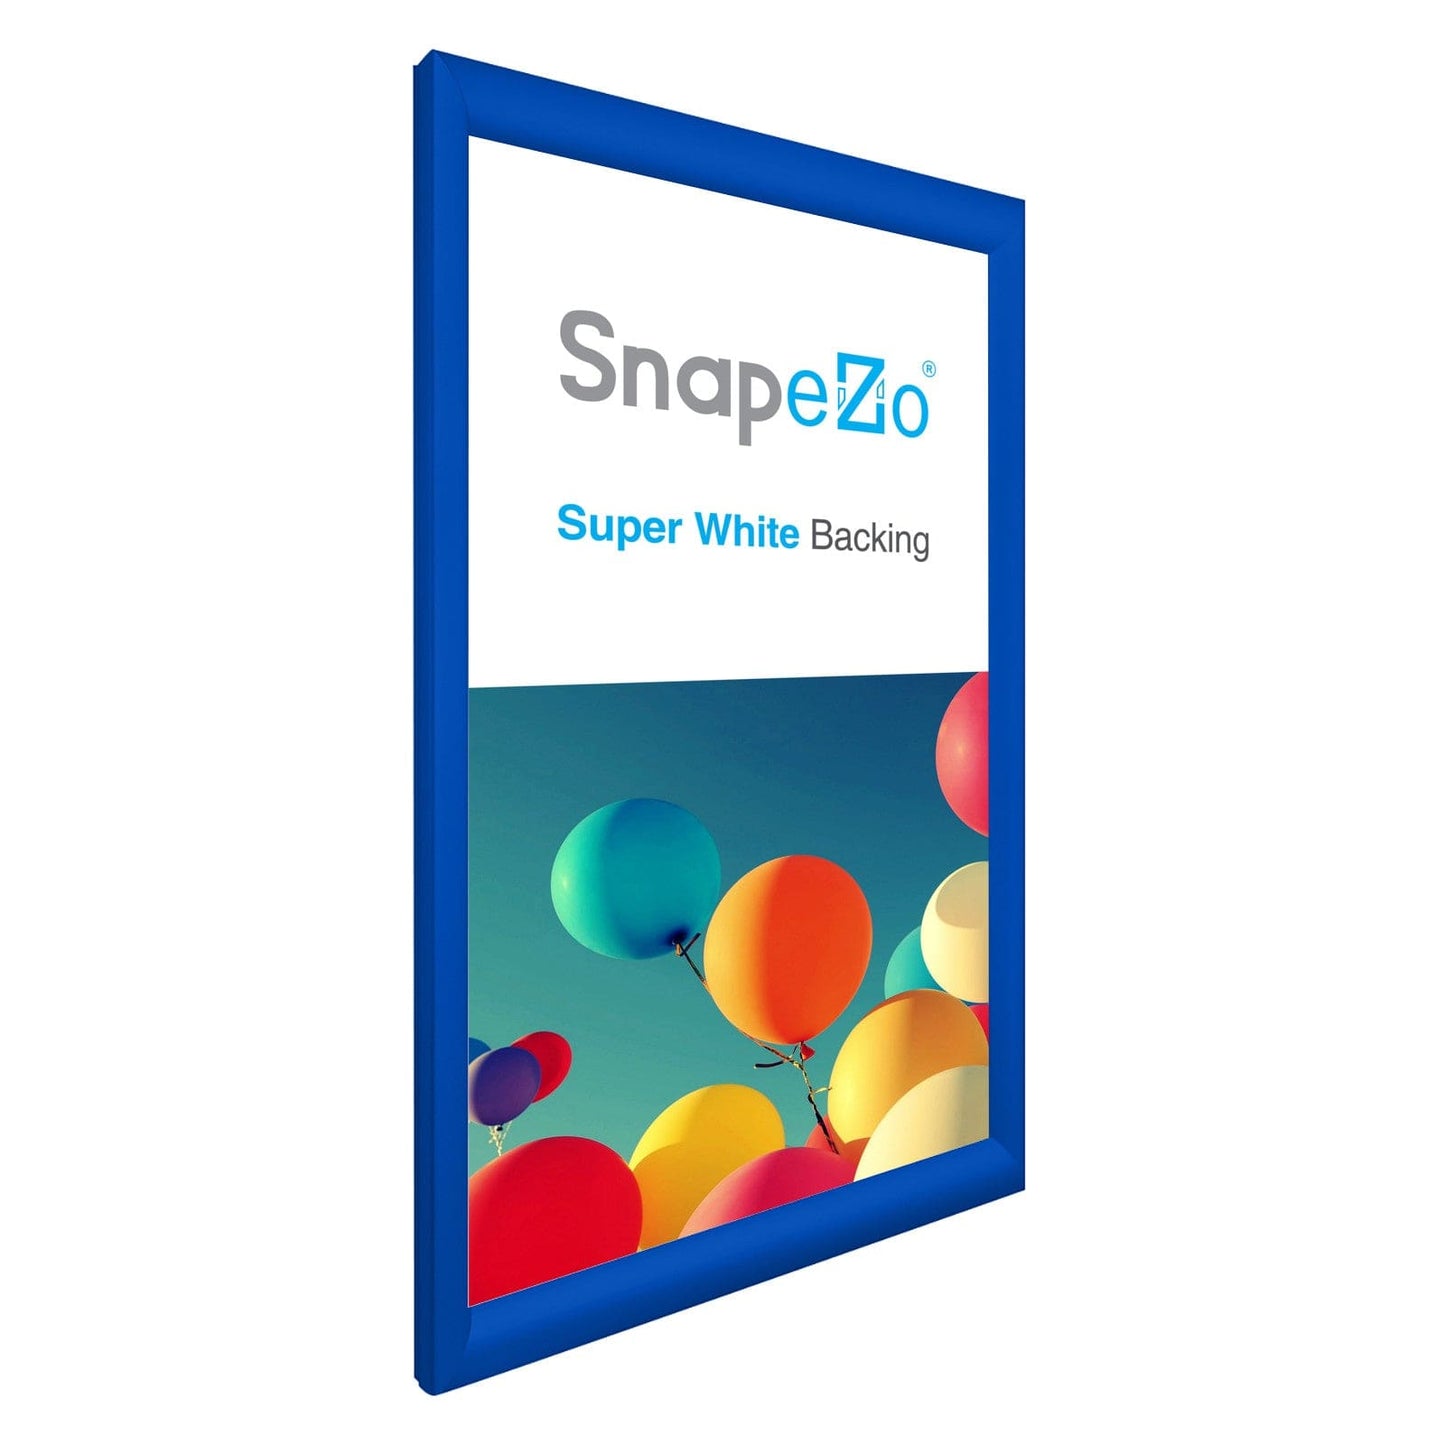 12x20 Blue SnapeZo® Snap Frame - 1.2" Profile - Snap Frames Direct